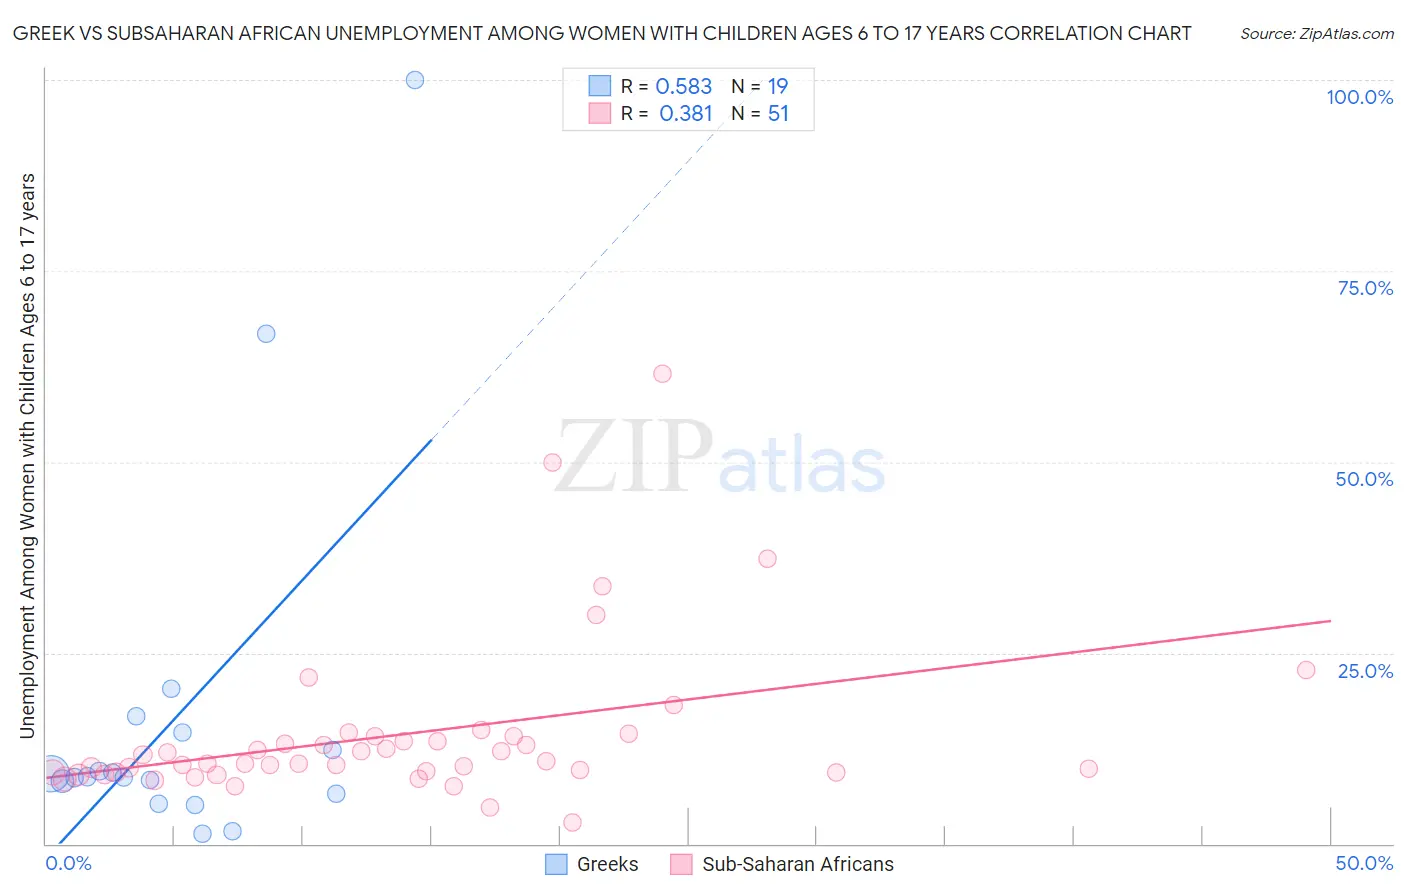 Greek vs Subsaharan African Unemployment Among Women with Children Ages 6 to 17 years